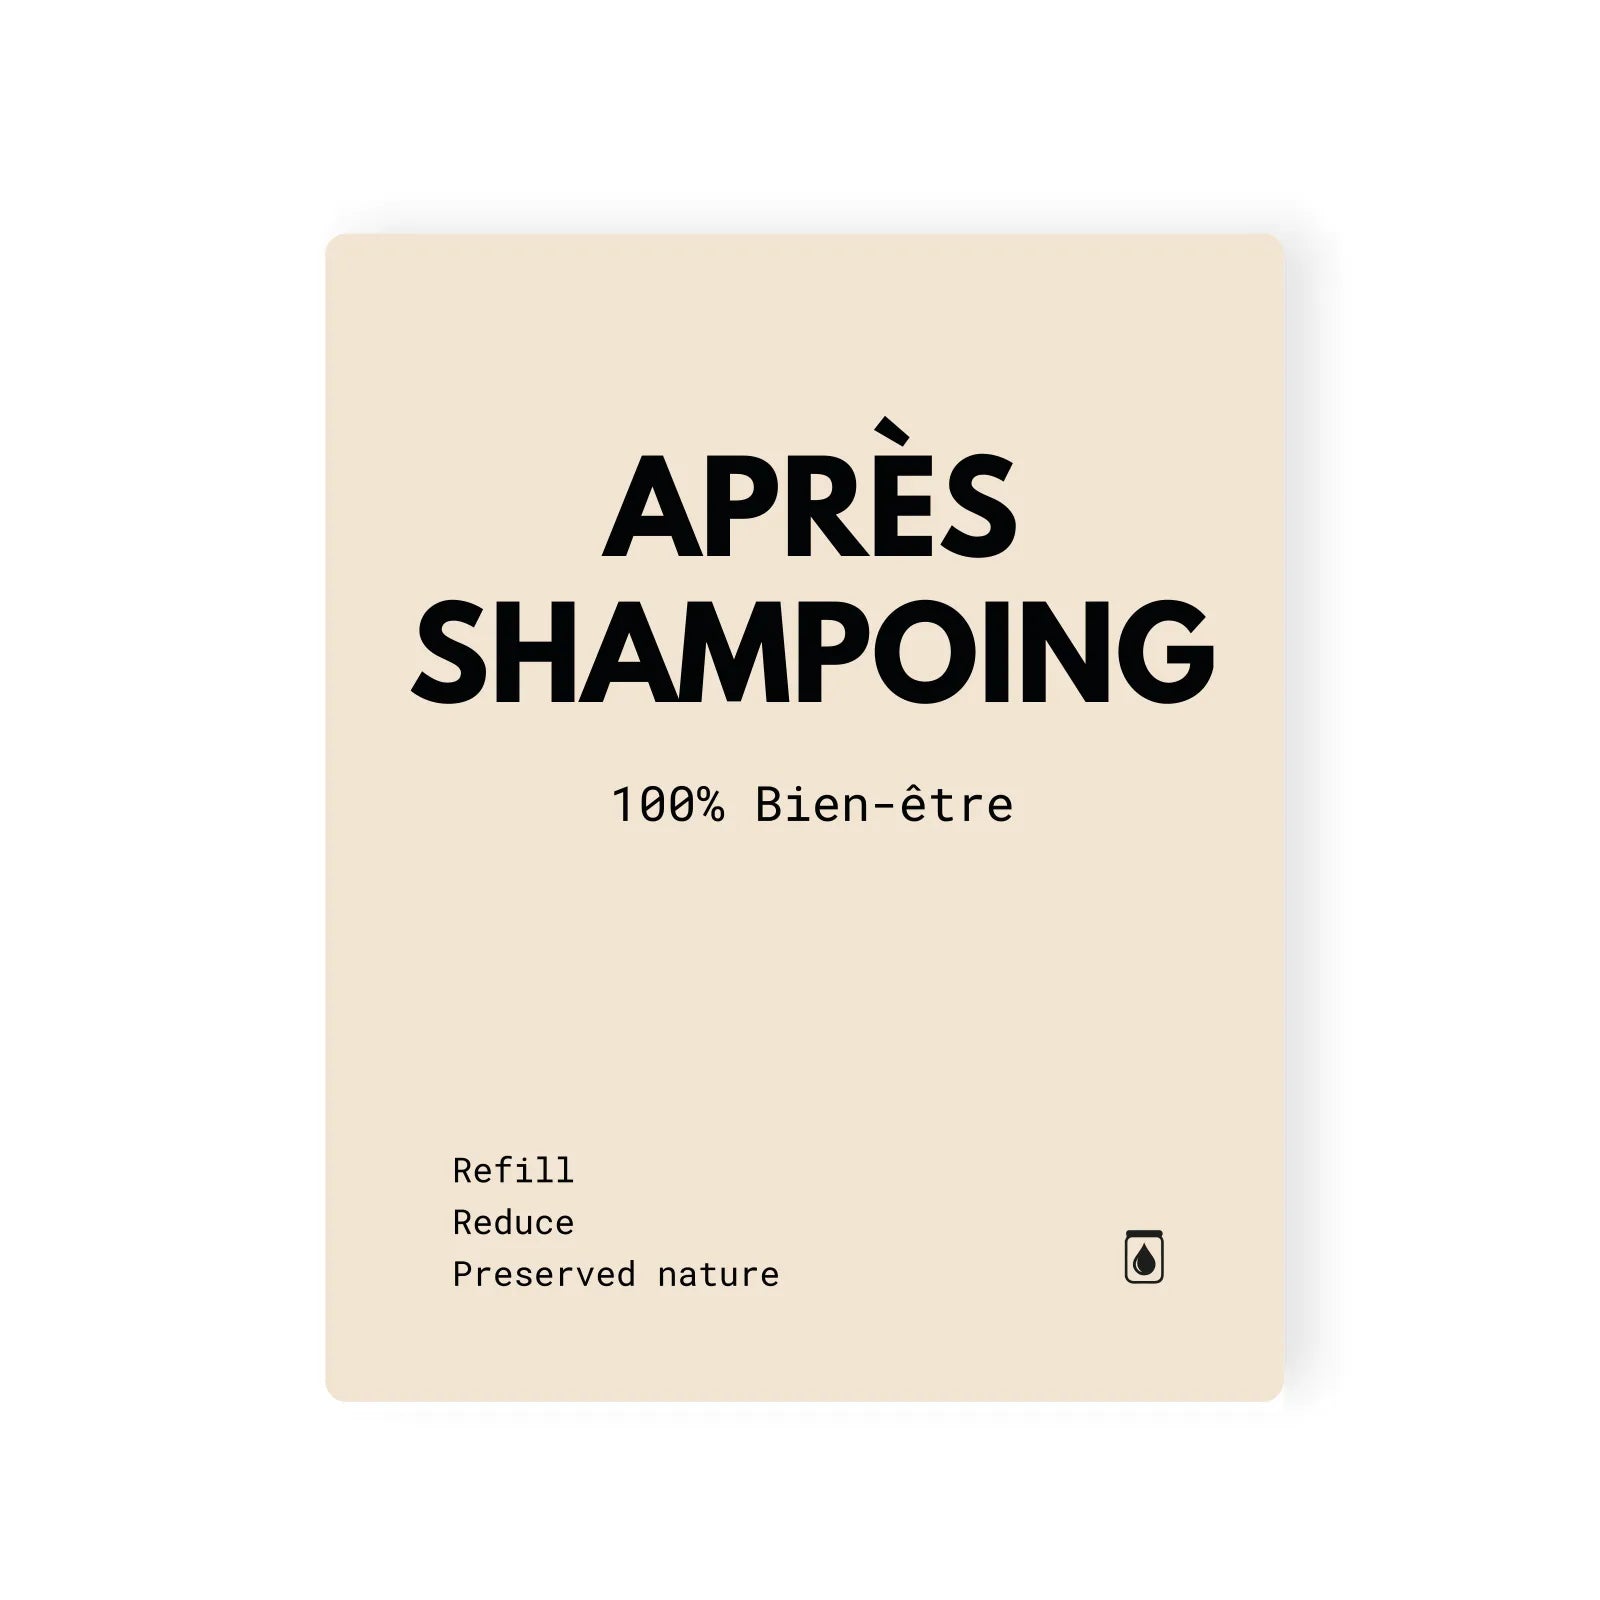 Étiquette APRES-SHAMPOING waterproof Beige Refill